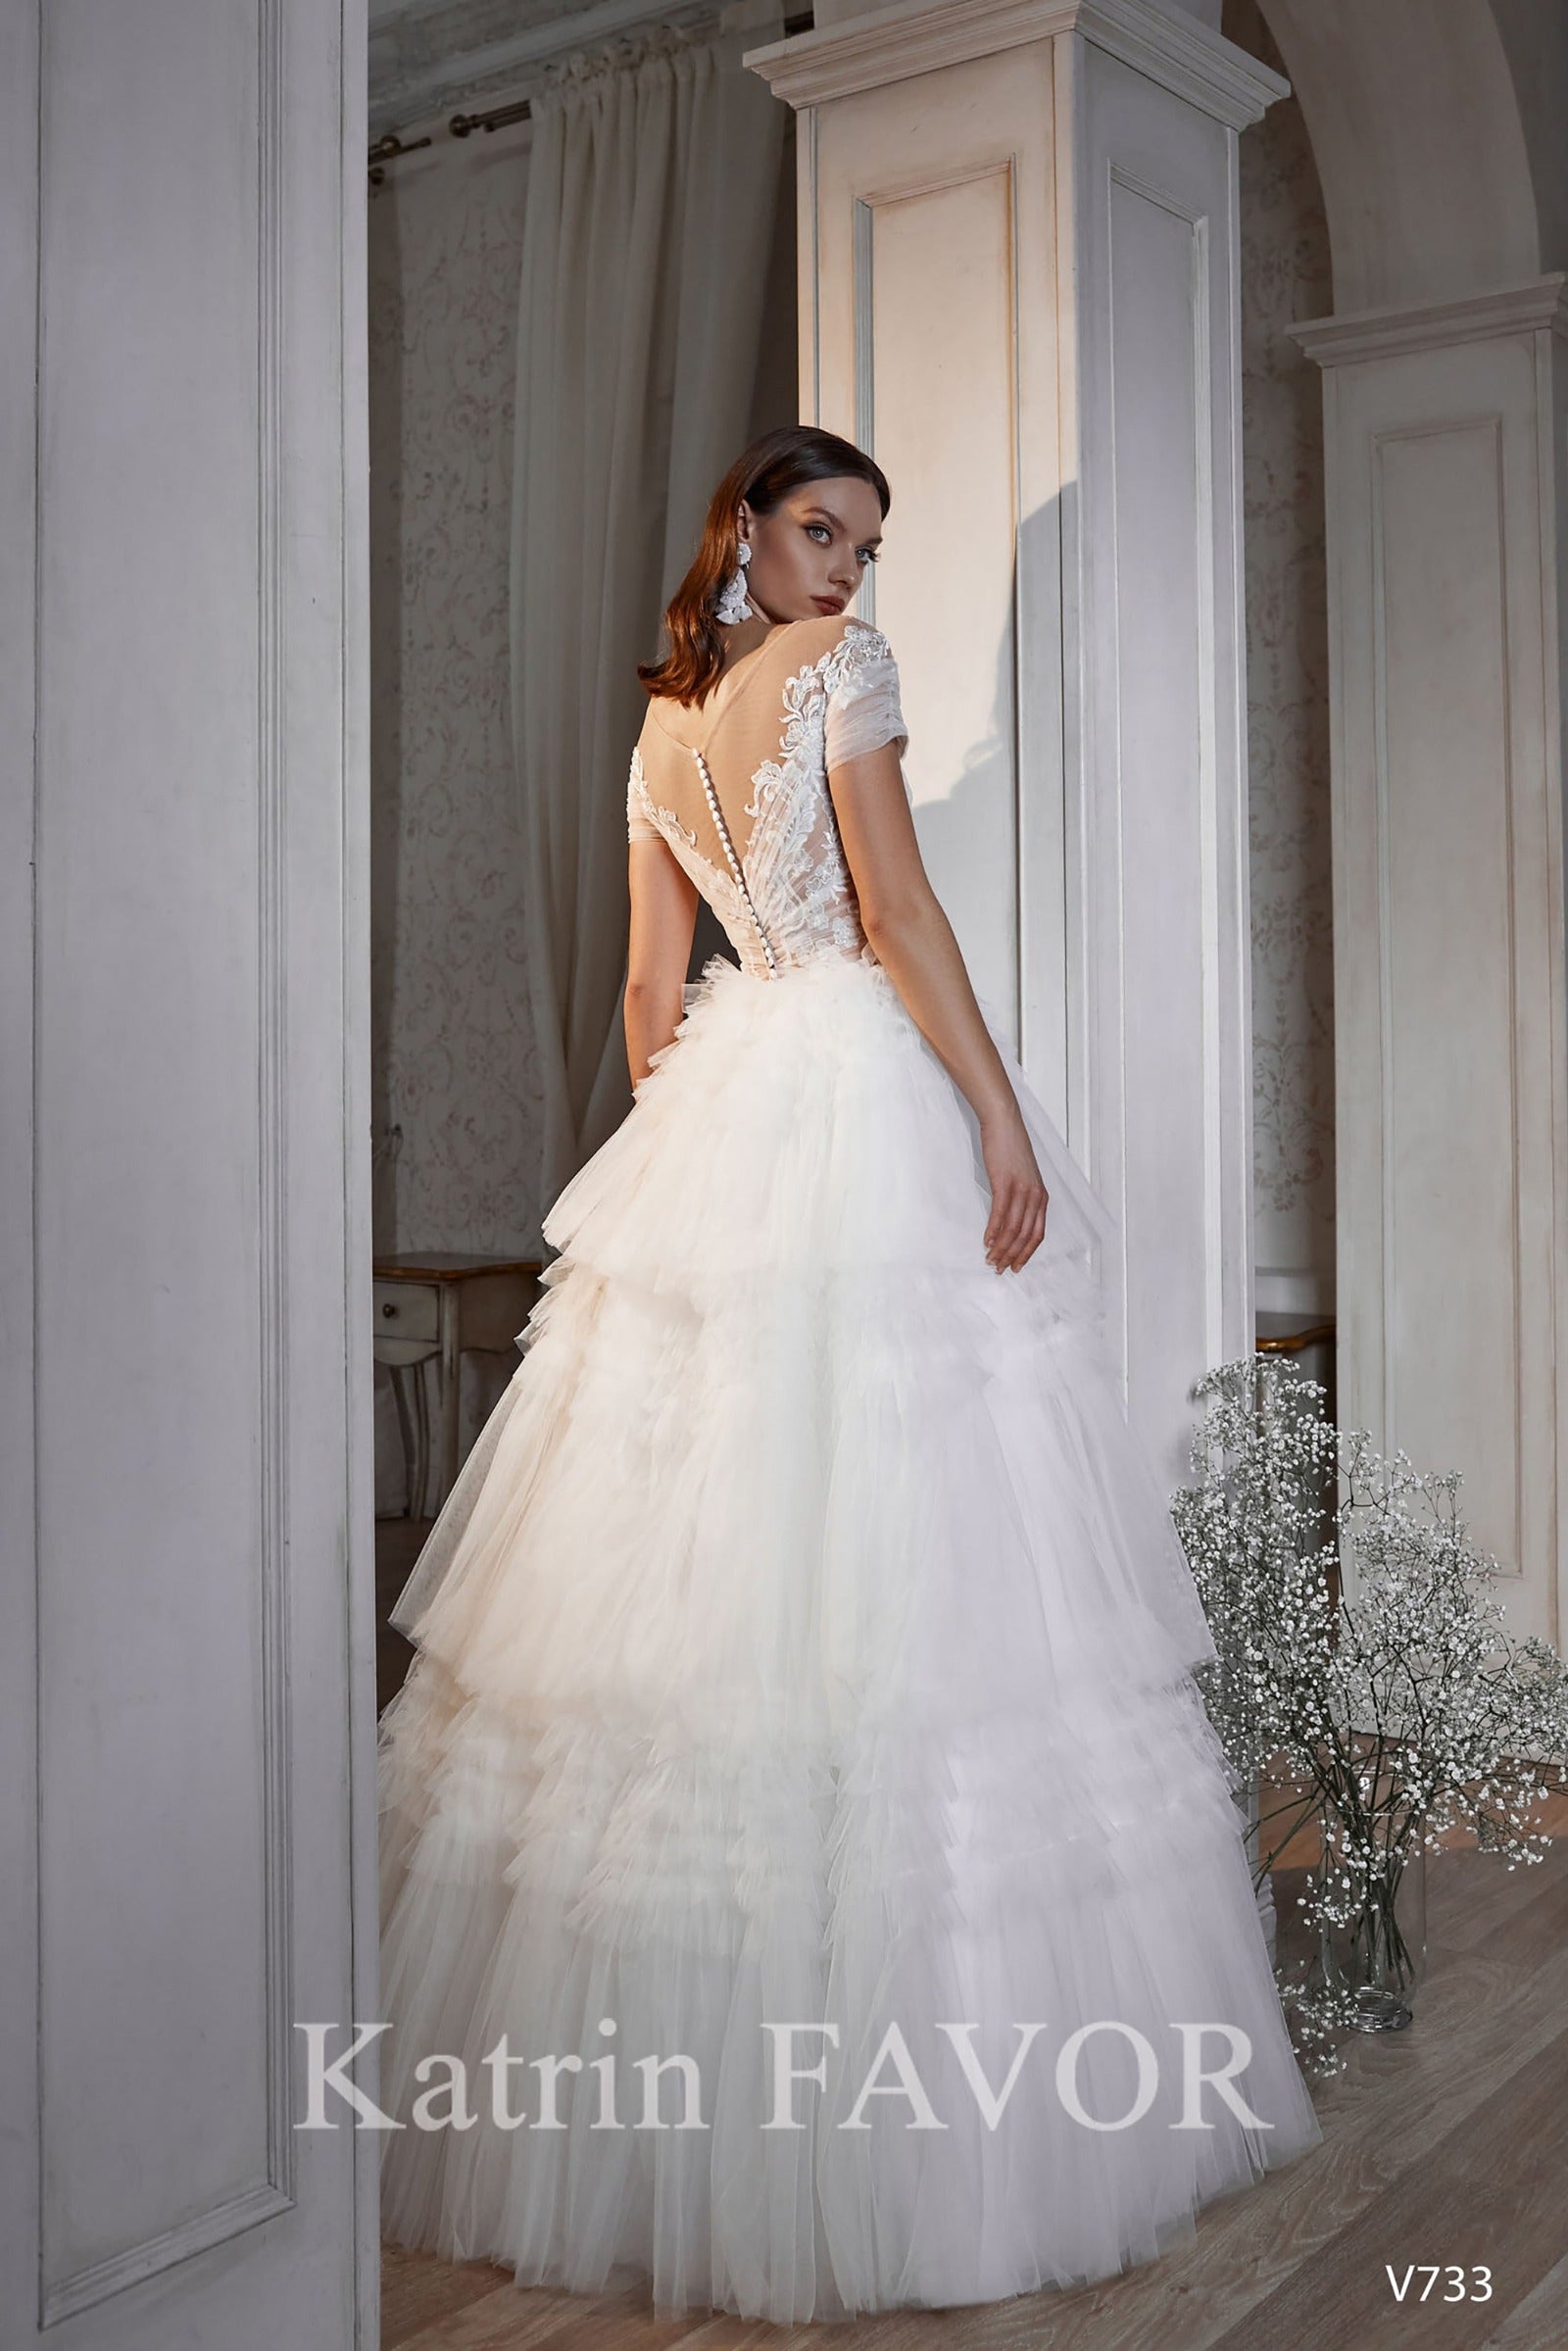 KatrinFAVORboutique-Tiered fairy wedding dress